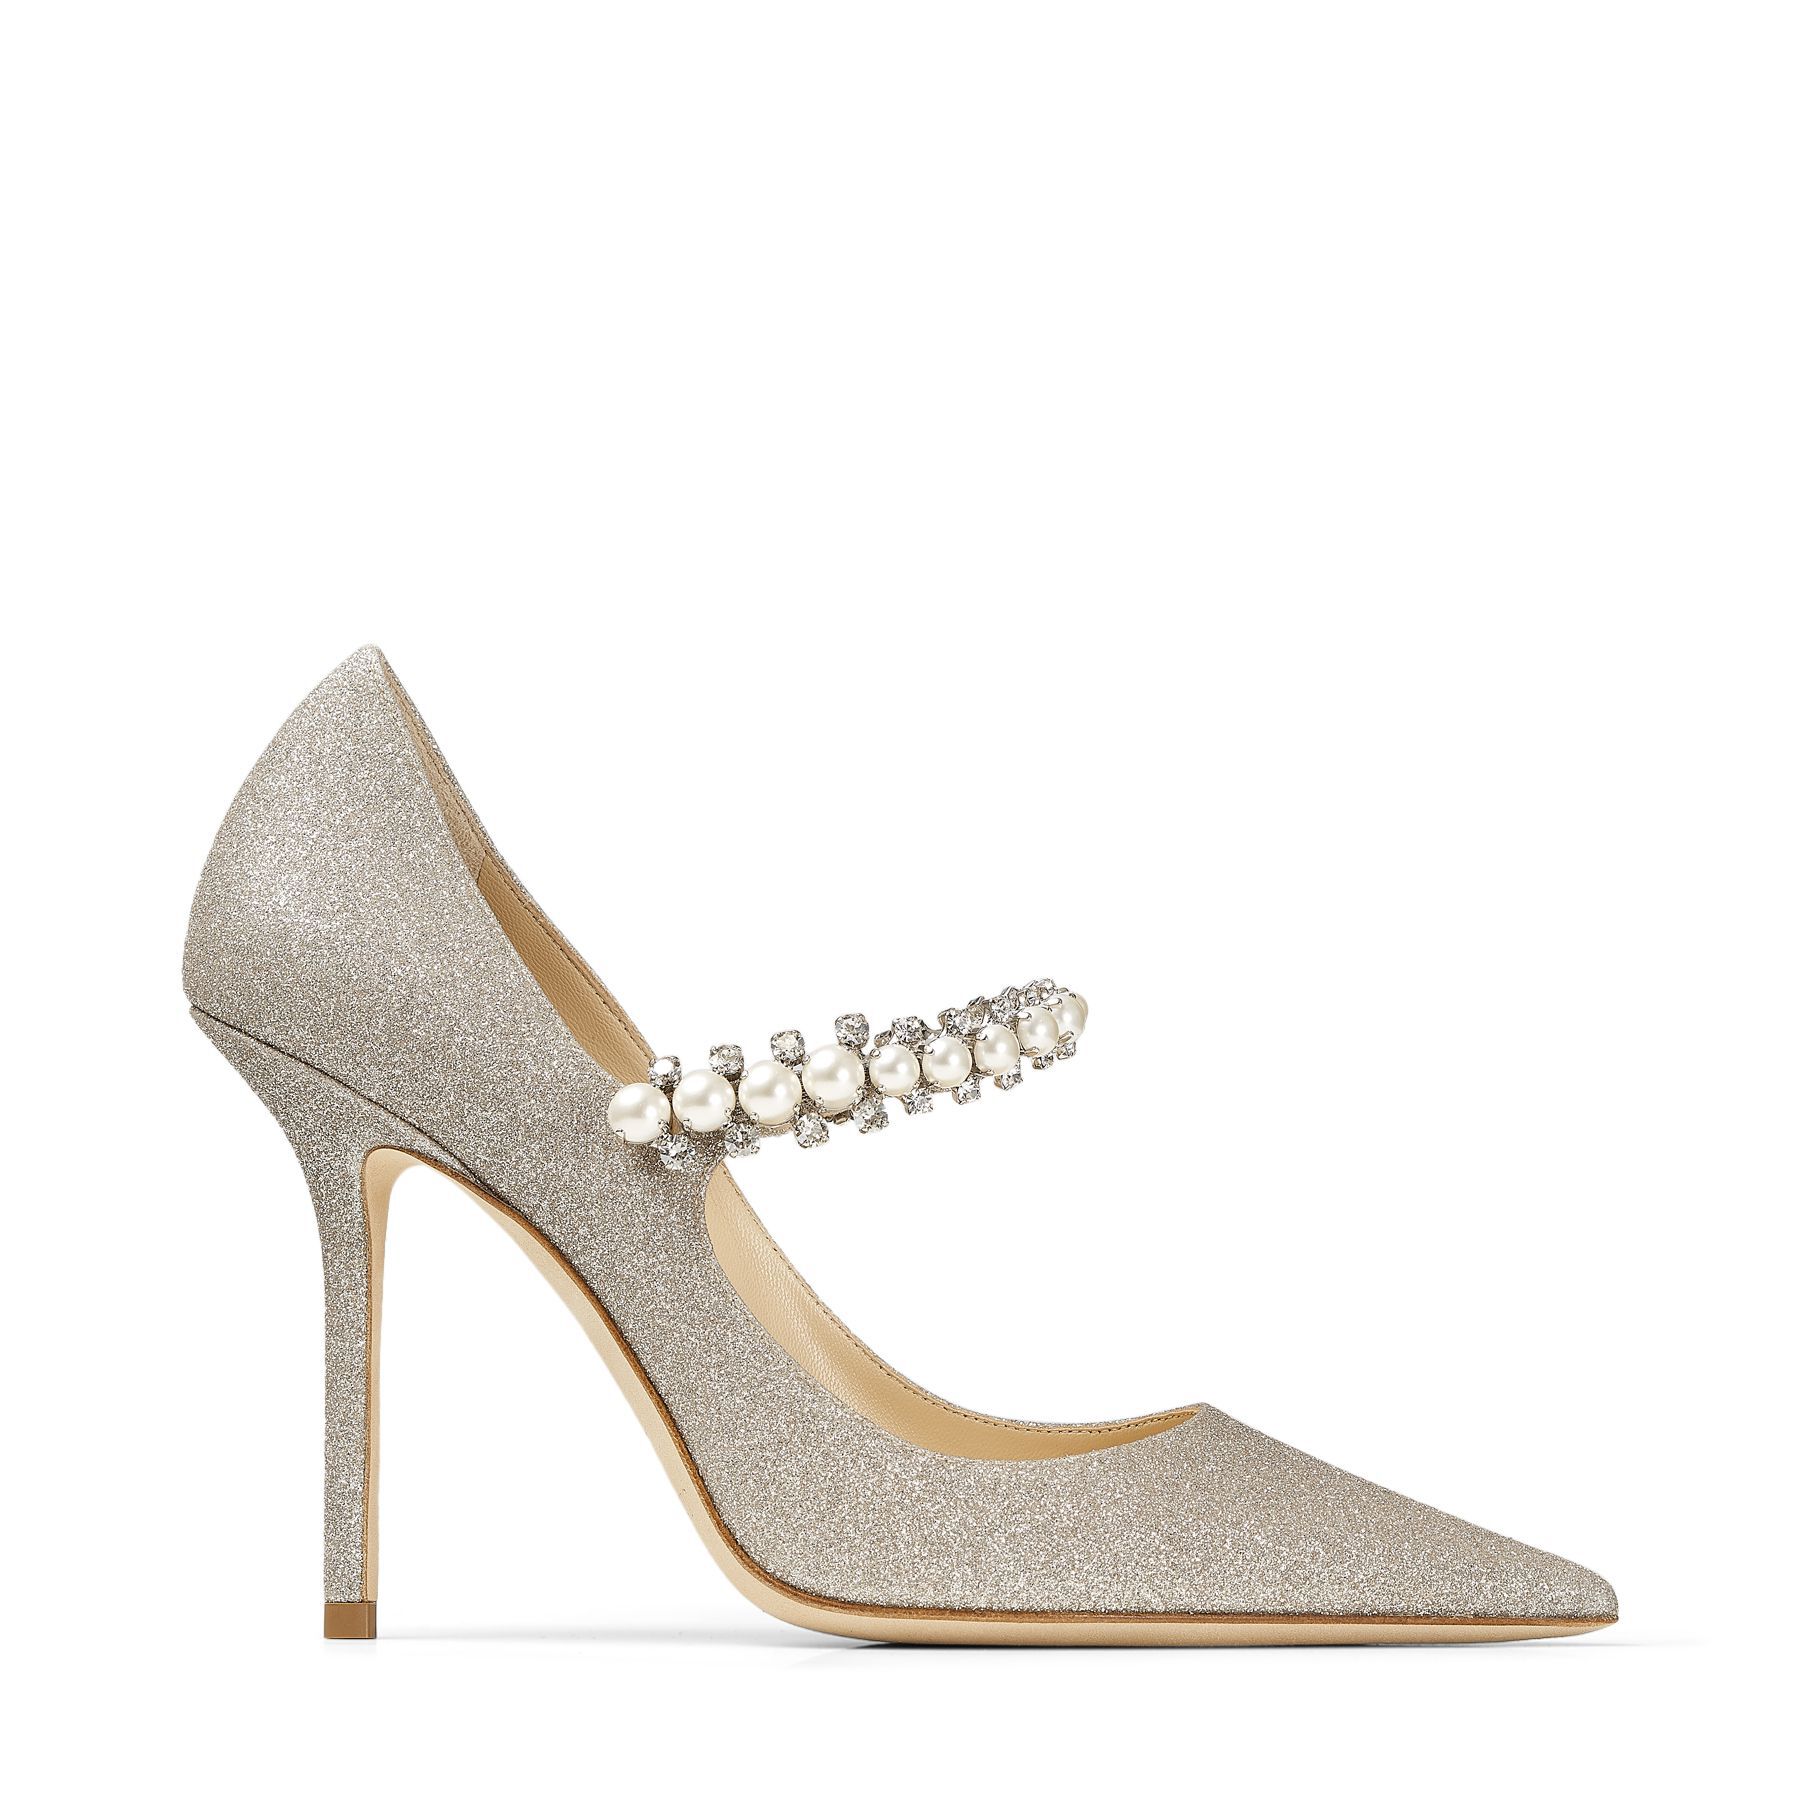 Ice Dusty Glitter Pumps with Crystal and Pearl Strap | BAILY 100 | Spring Summer 2021 | JIMMY CHOO